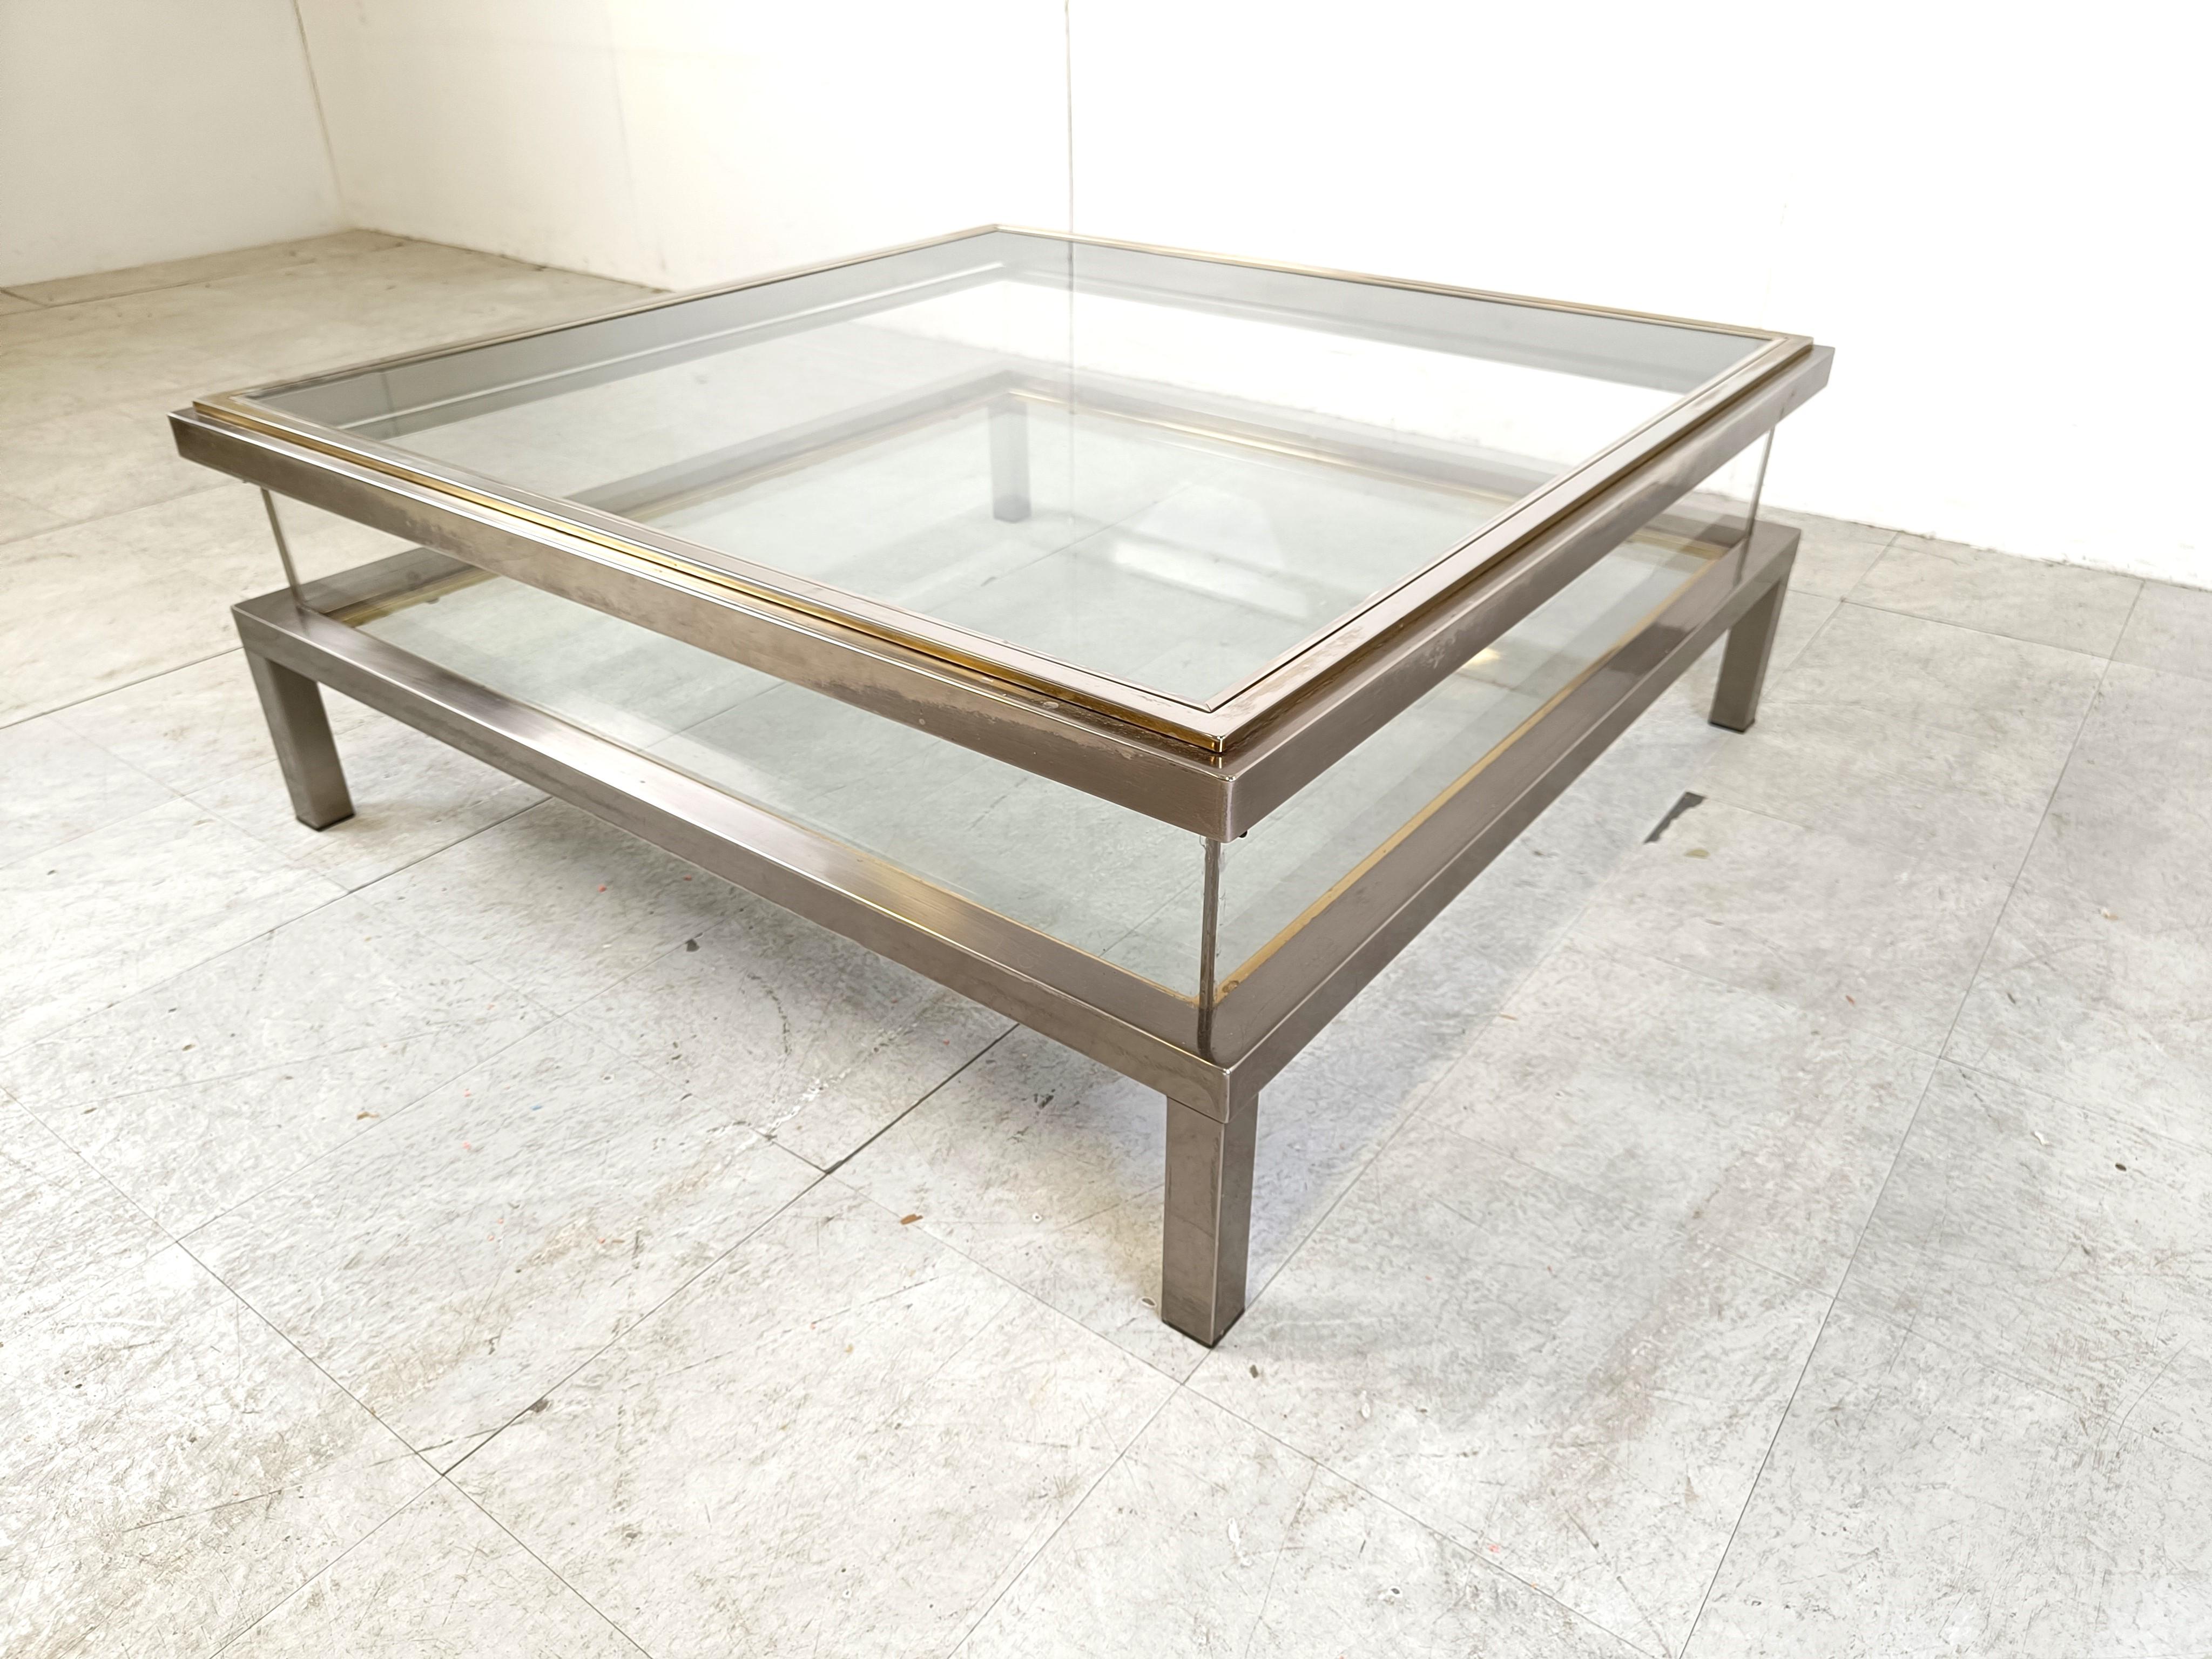 Vintage display coffee table with a sliding glass top.

This luxurious coffee table is made from heavy quality polished steel, brass and glass.

Very good condition.

1970s - France

Dimensions:
Height: 43cm/16.92